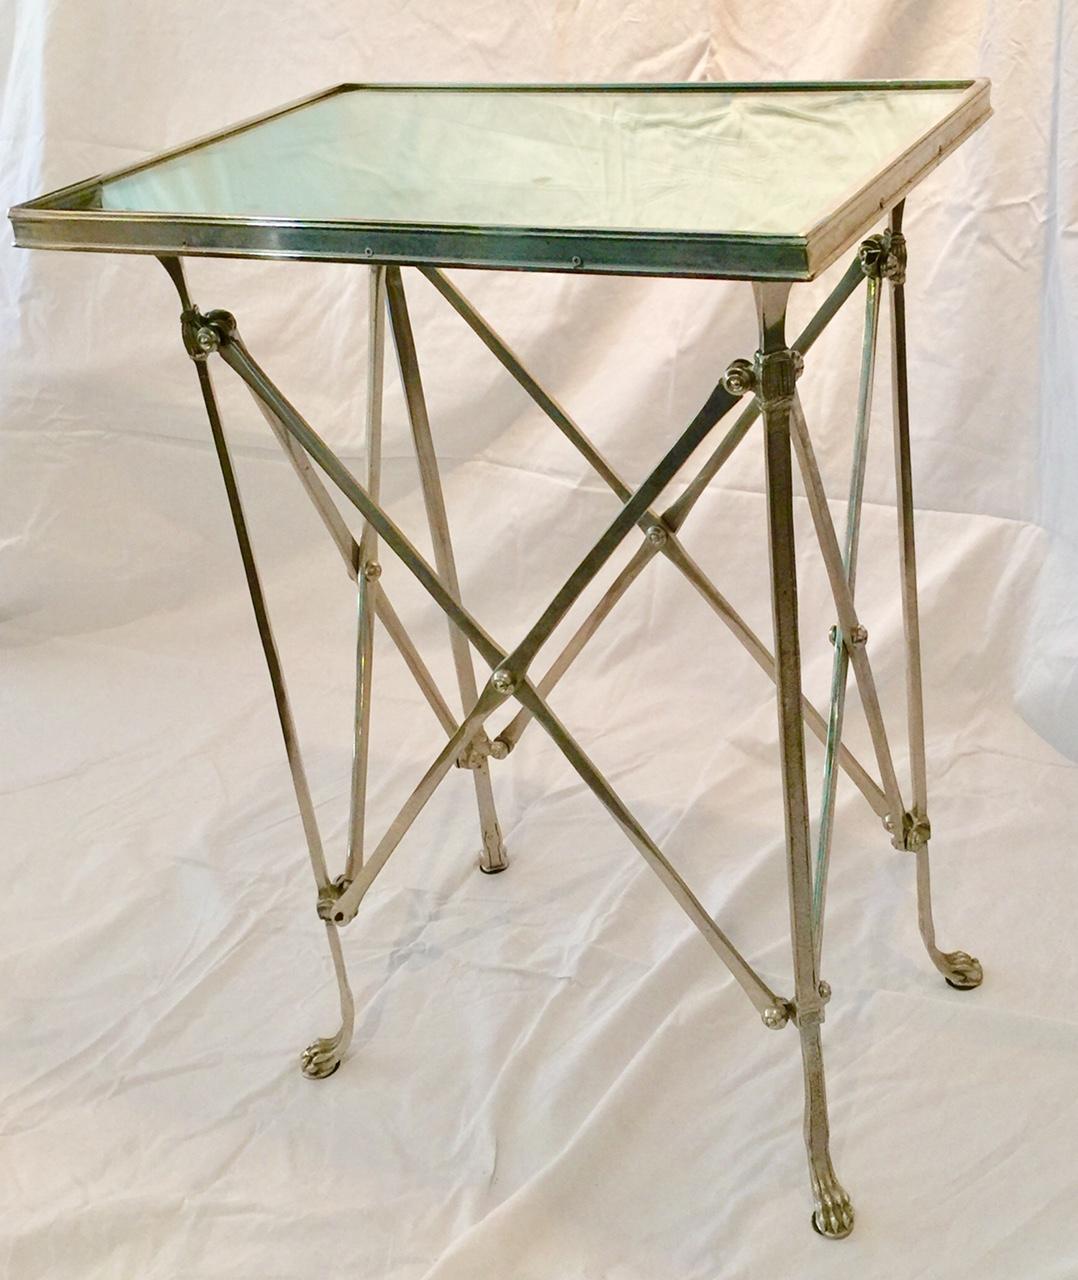 Neoclassical Empire Style Rectangular Gueridon Table, Nickeled with Mirror Top In Good Condition For Sale In Montreal, Quebec